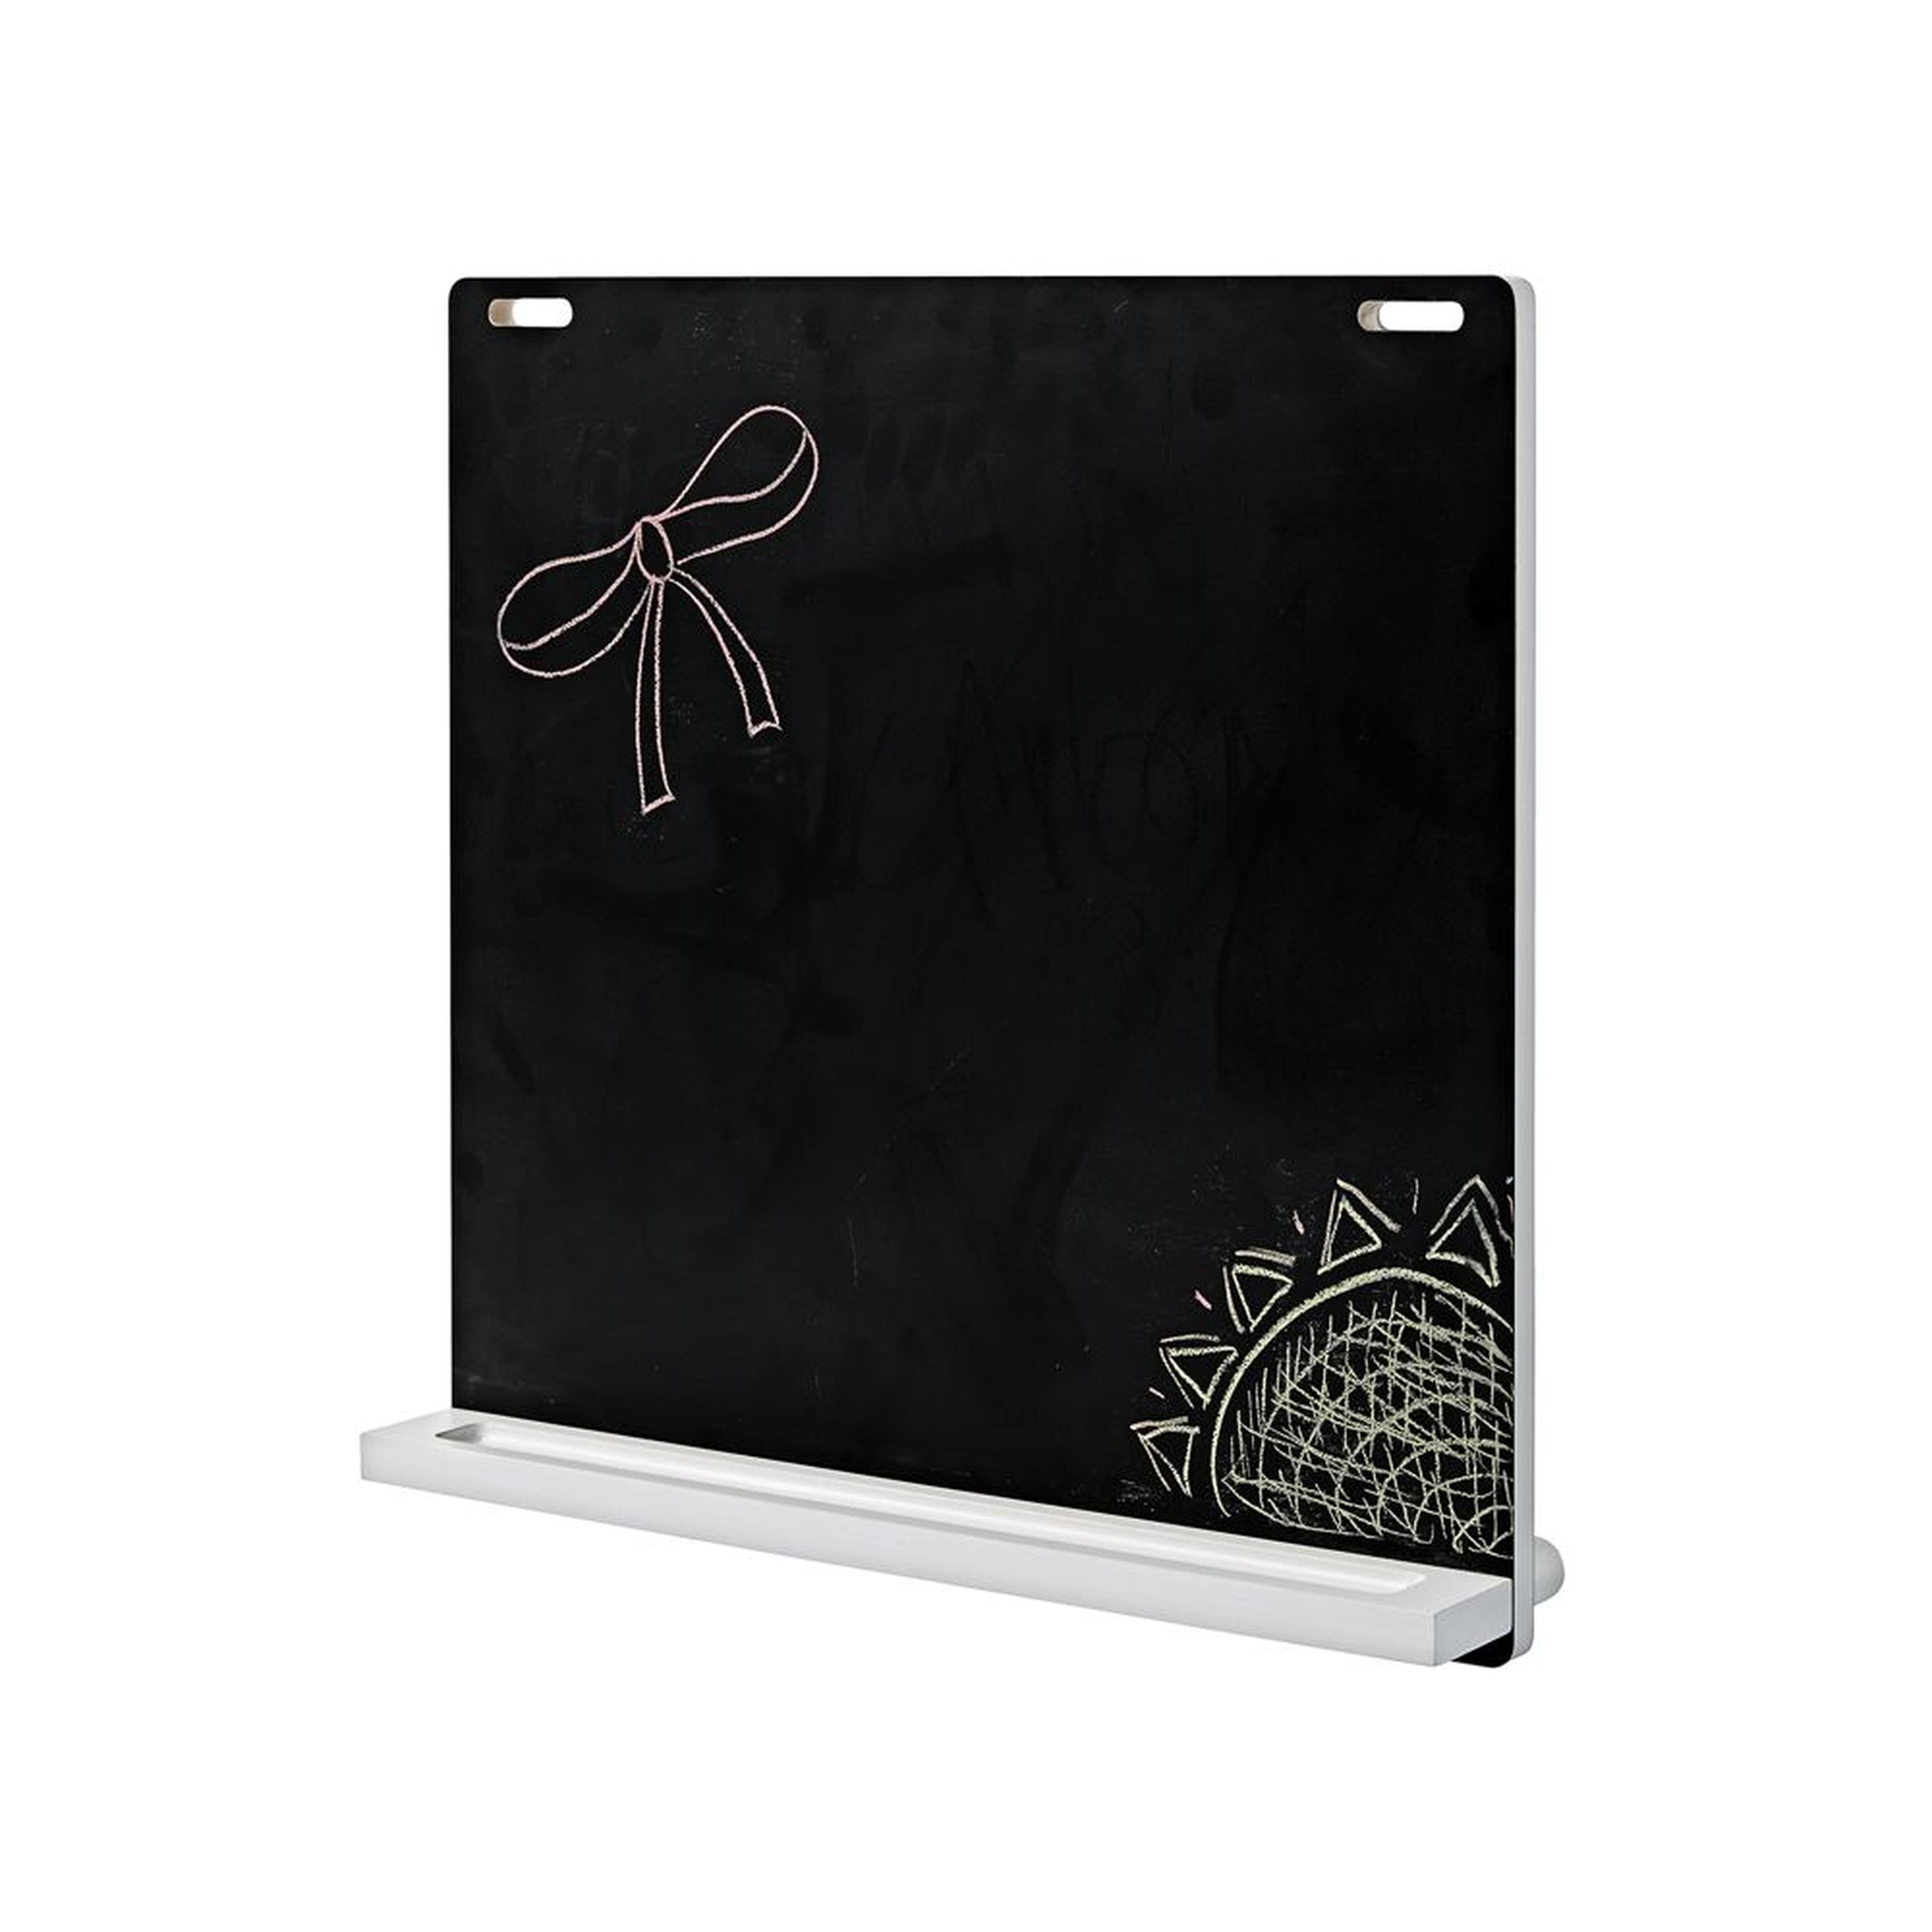 Beaumont Reversible Chalkboard/Whiteboard - Crate and Barrel